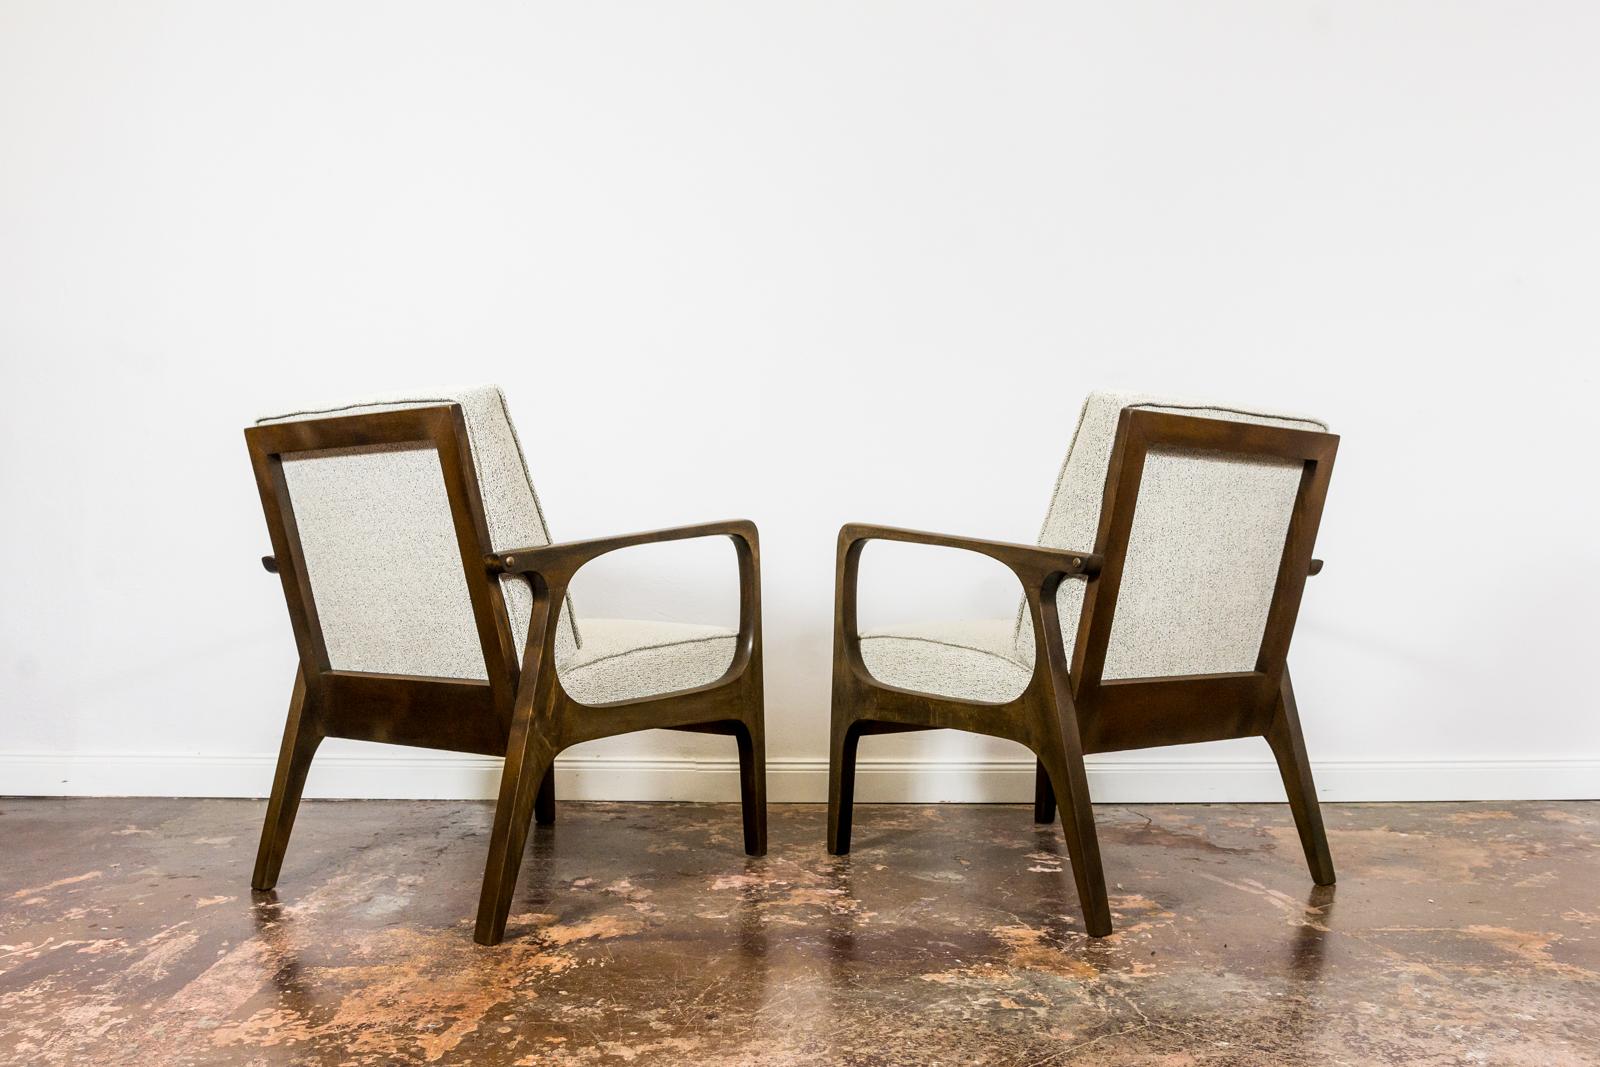 Beech Pair of Mid-Century Armchairs from Prudnickie Fabryki Mebli 1960's, Poland For Sale